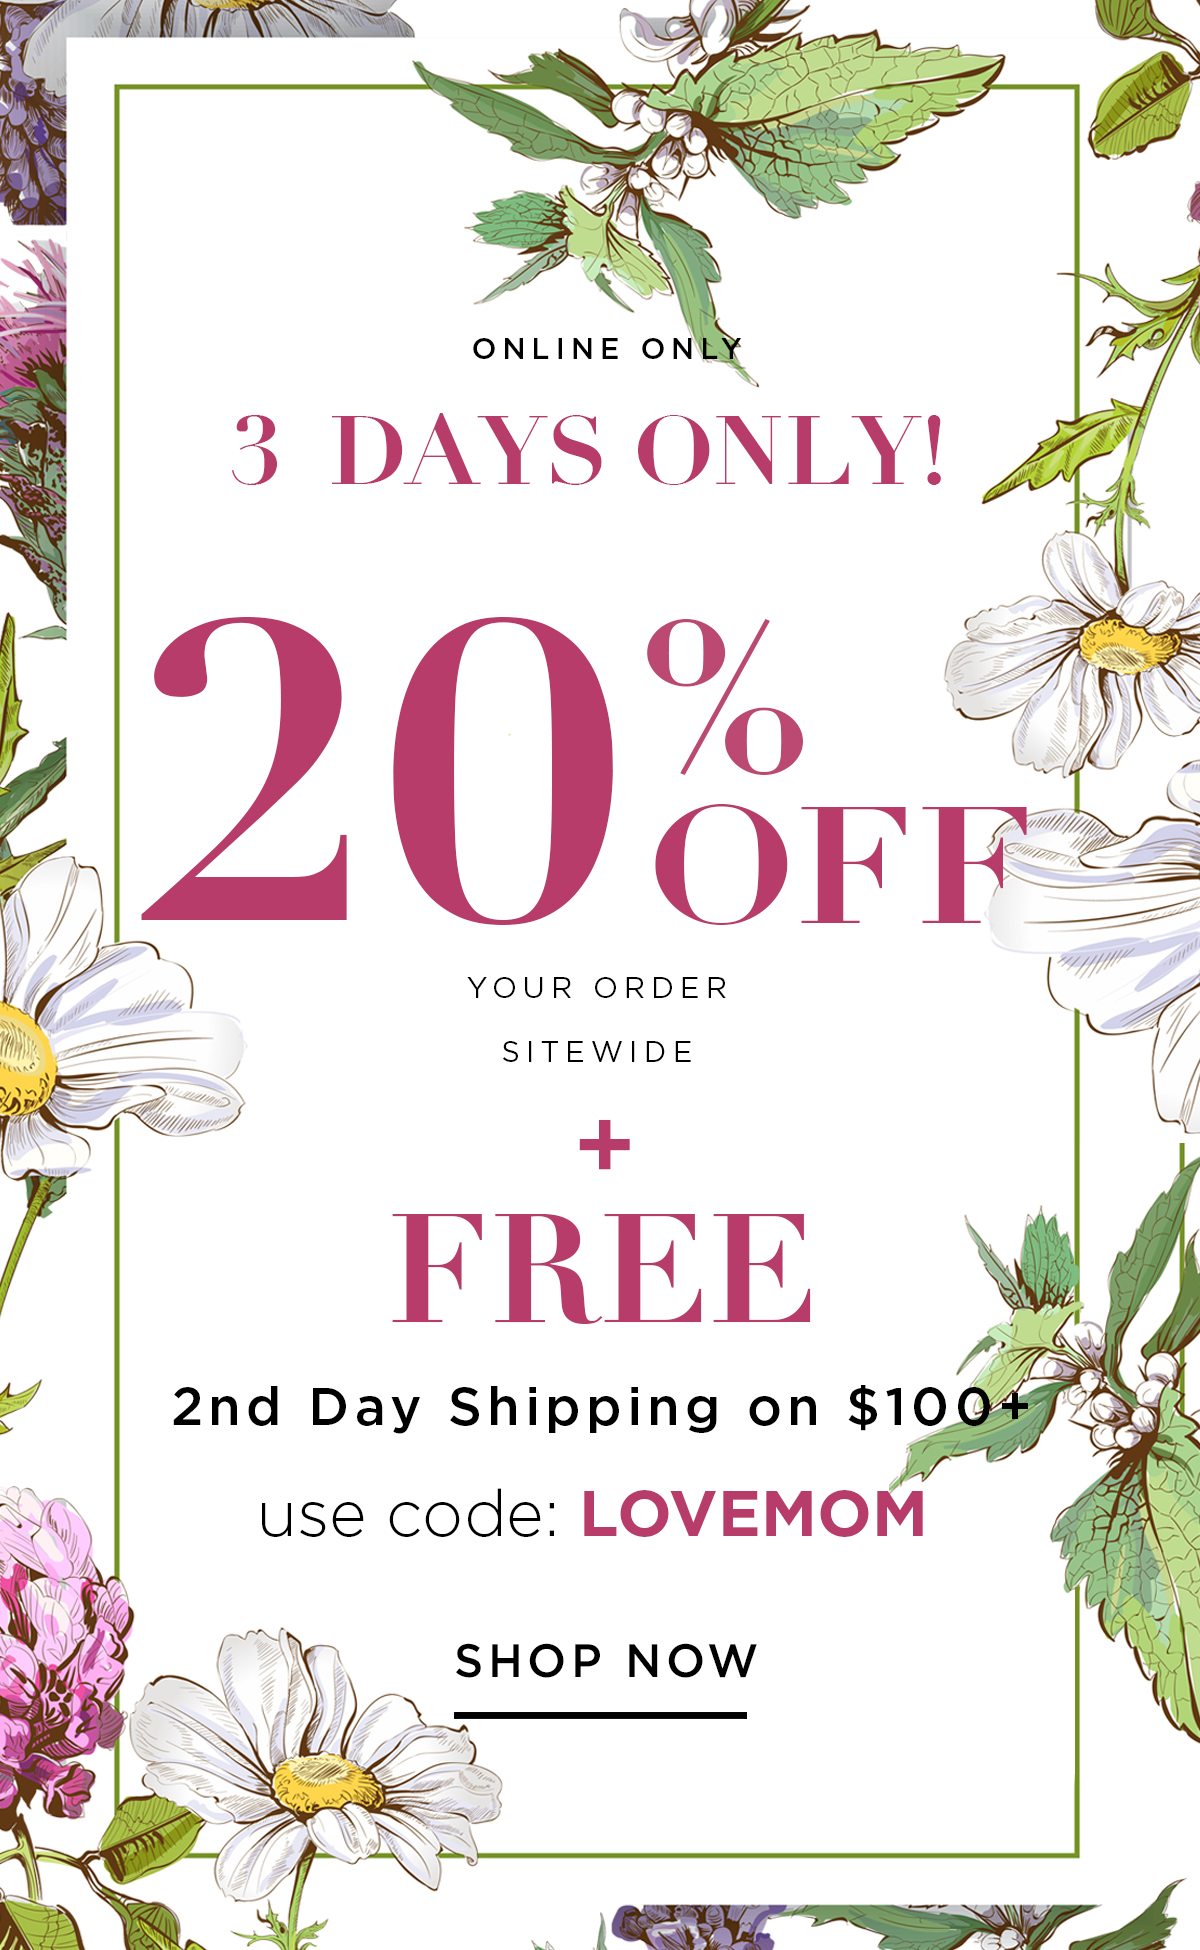 Online Only 2 Days Only! 20% Off Your Order Sitewide + Free 2nd Day Shipping On $100+ Use Code: LOVEMOM - Shop Now